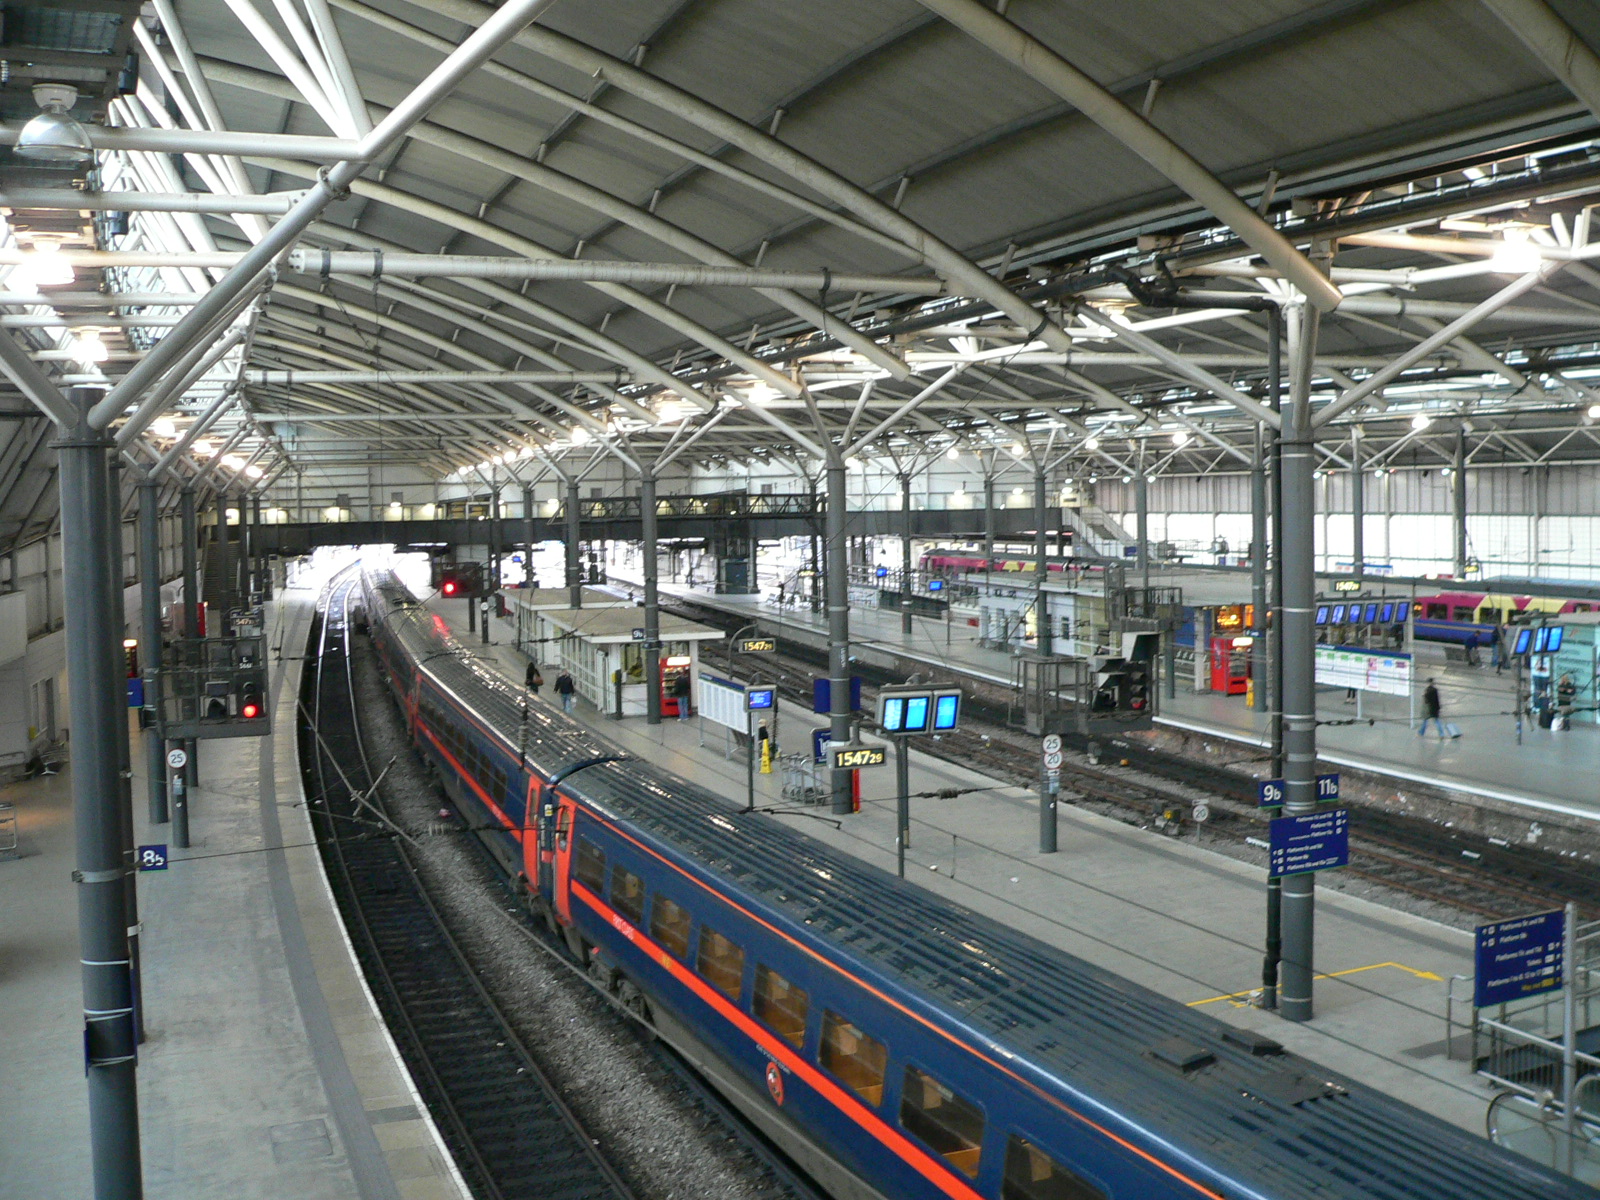 File:Overview of Leeds City railway station 13.jpg - Wikimedia Commons